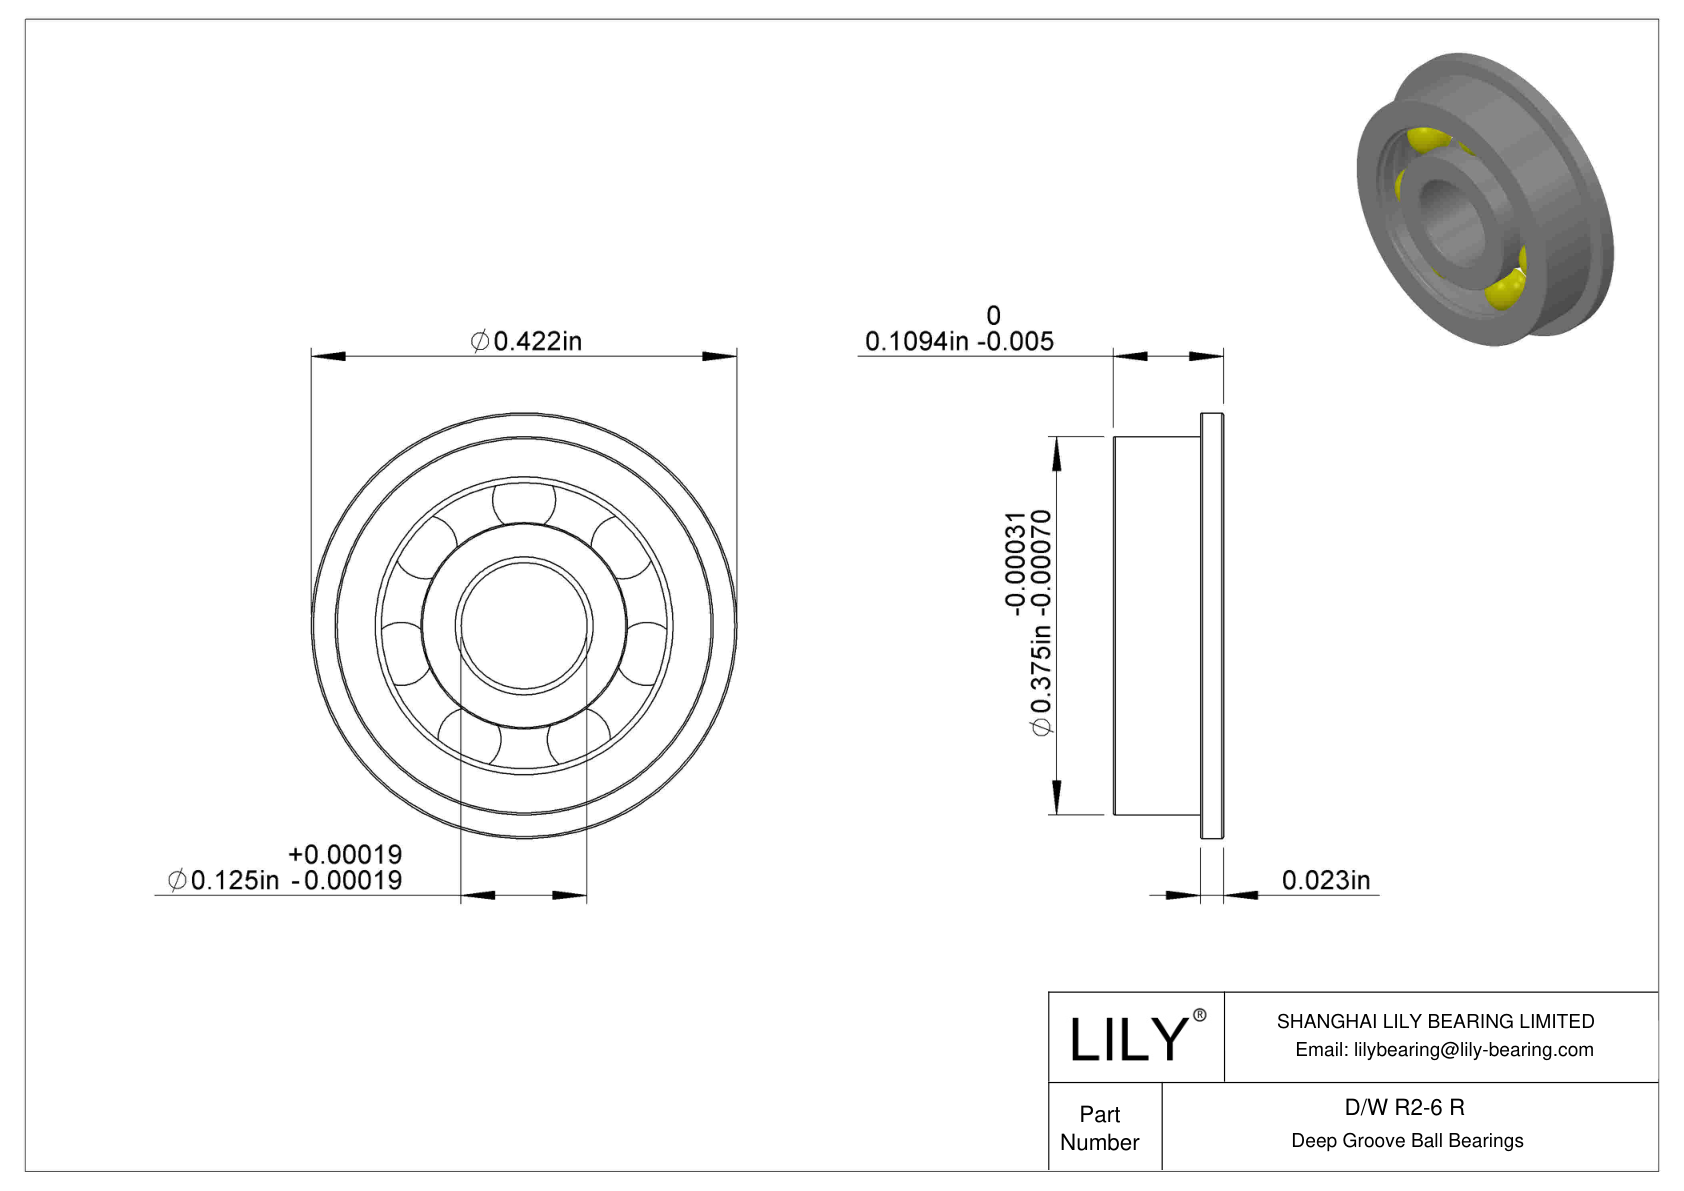 D/W R2-6 R Flanged Ball Bearings cad drawing